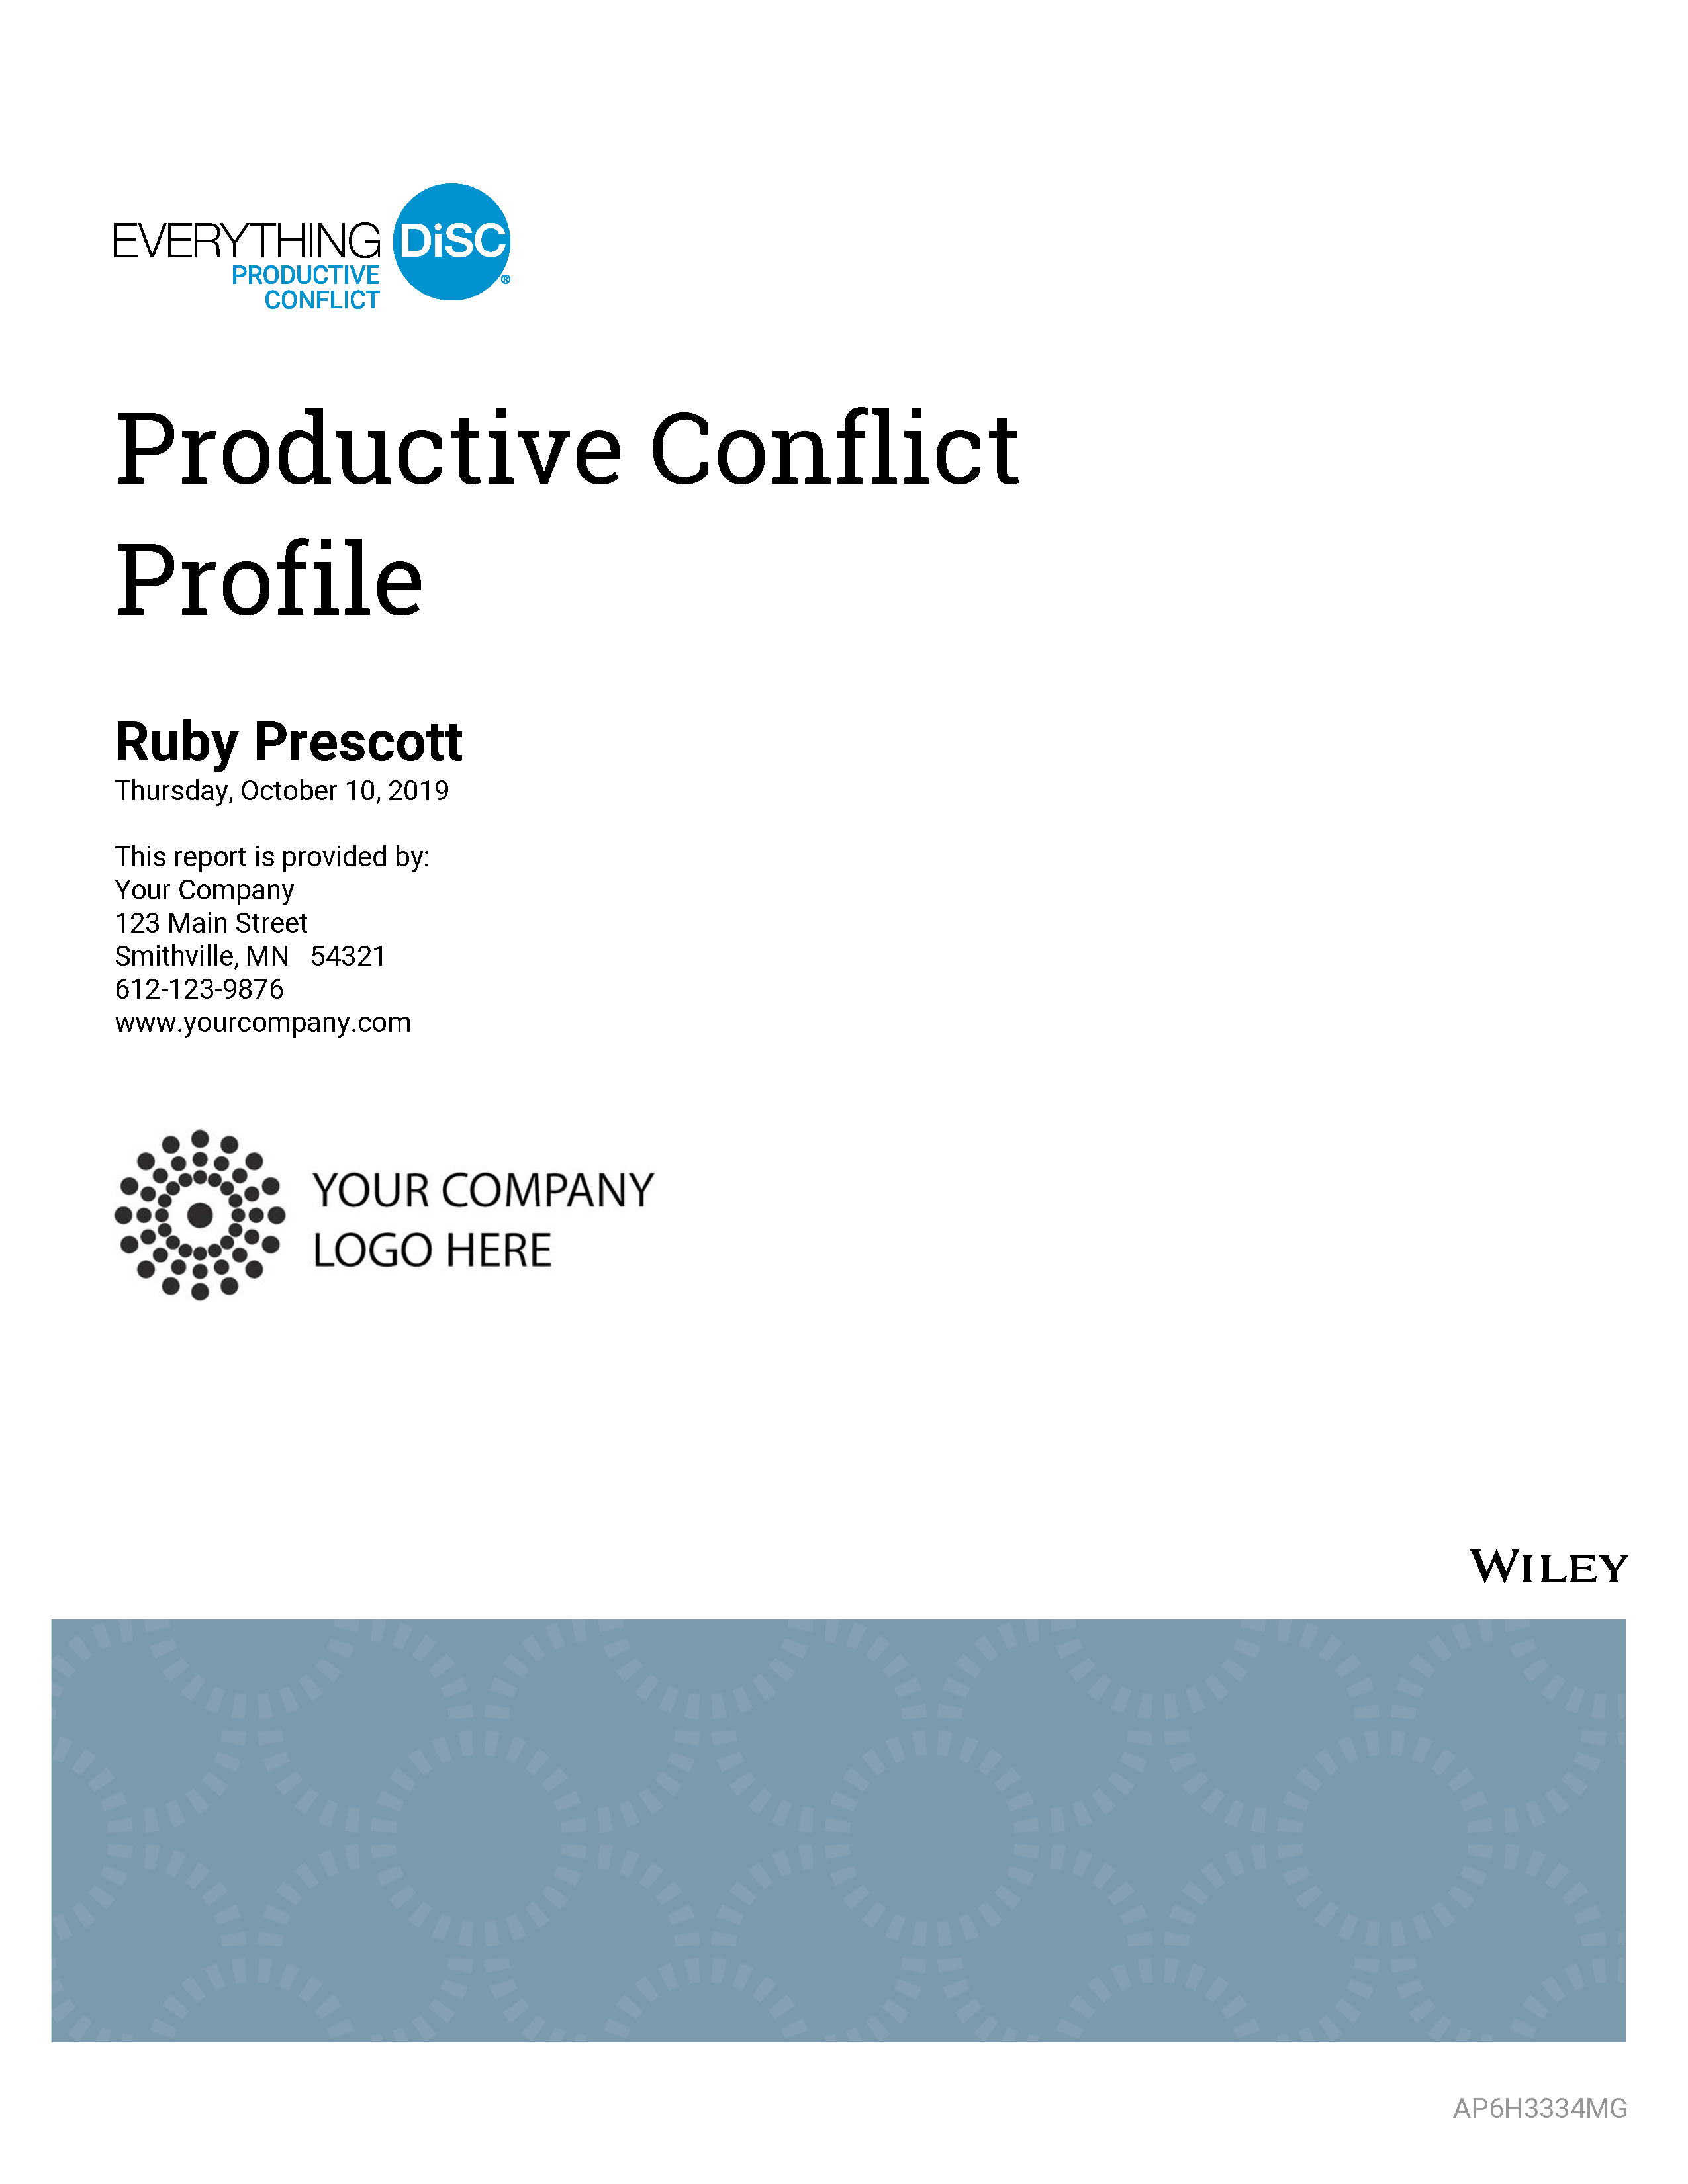 Everything DiSC Productive Conflict Profile Cover Image